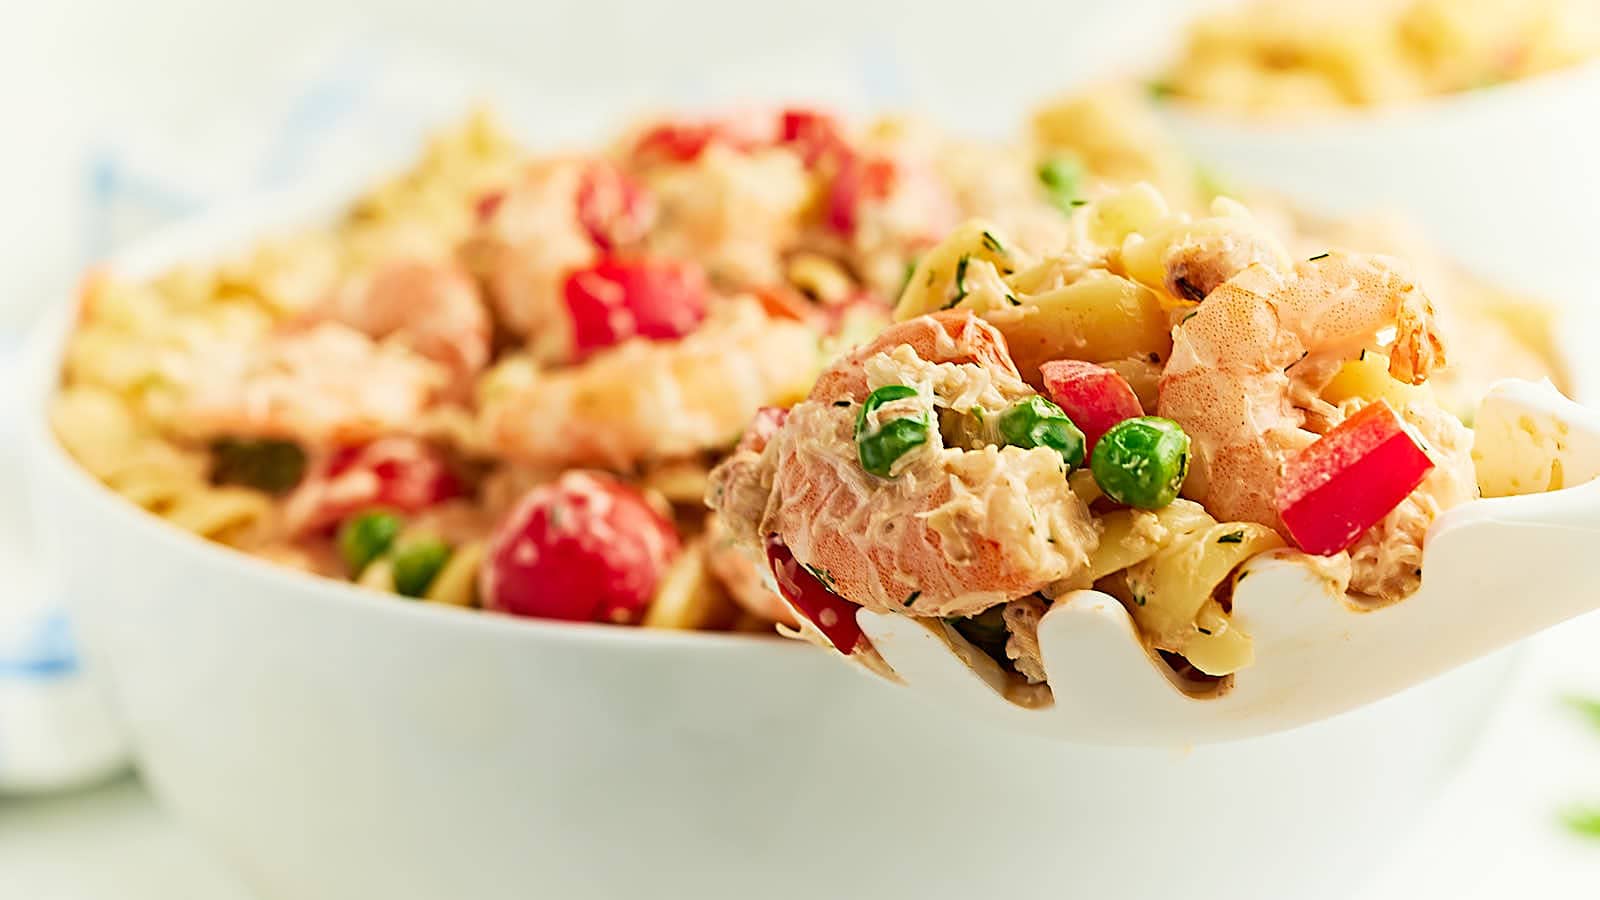 Seafood Pasta Salad recipe by Cheerful Cook.